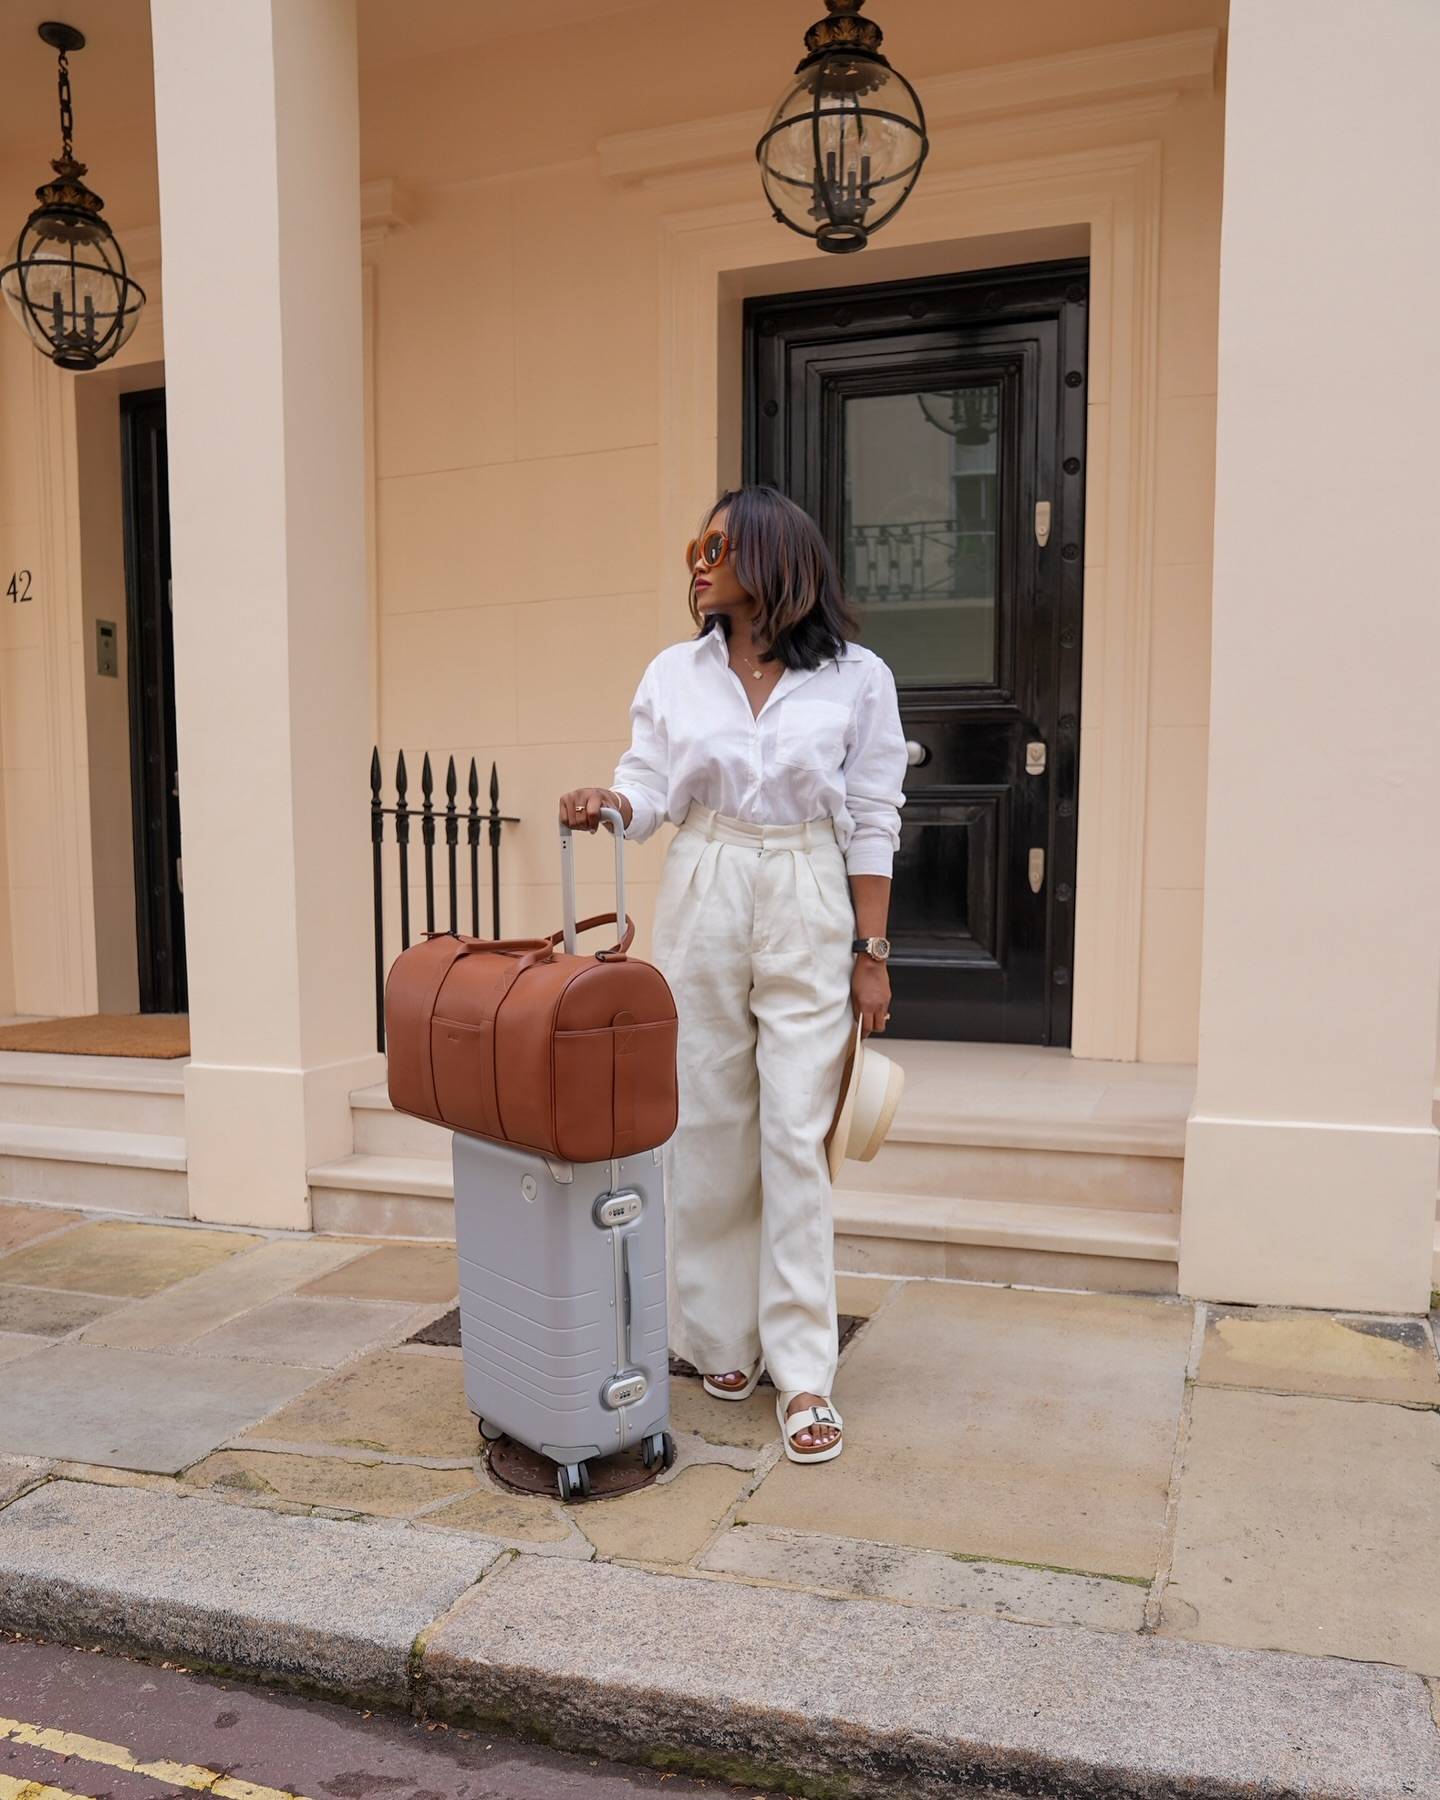 Summer travels here we come! So excited to take my new @monostravel Hybrid Carry-On and Metro Carry-All Duffel! So light and stylish 🤍🤎 #monostravel *Ad

#luxuryluggage #luxurytravel #summertravel